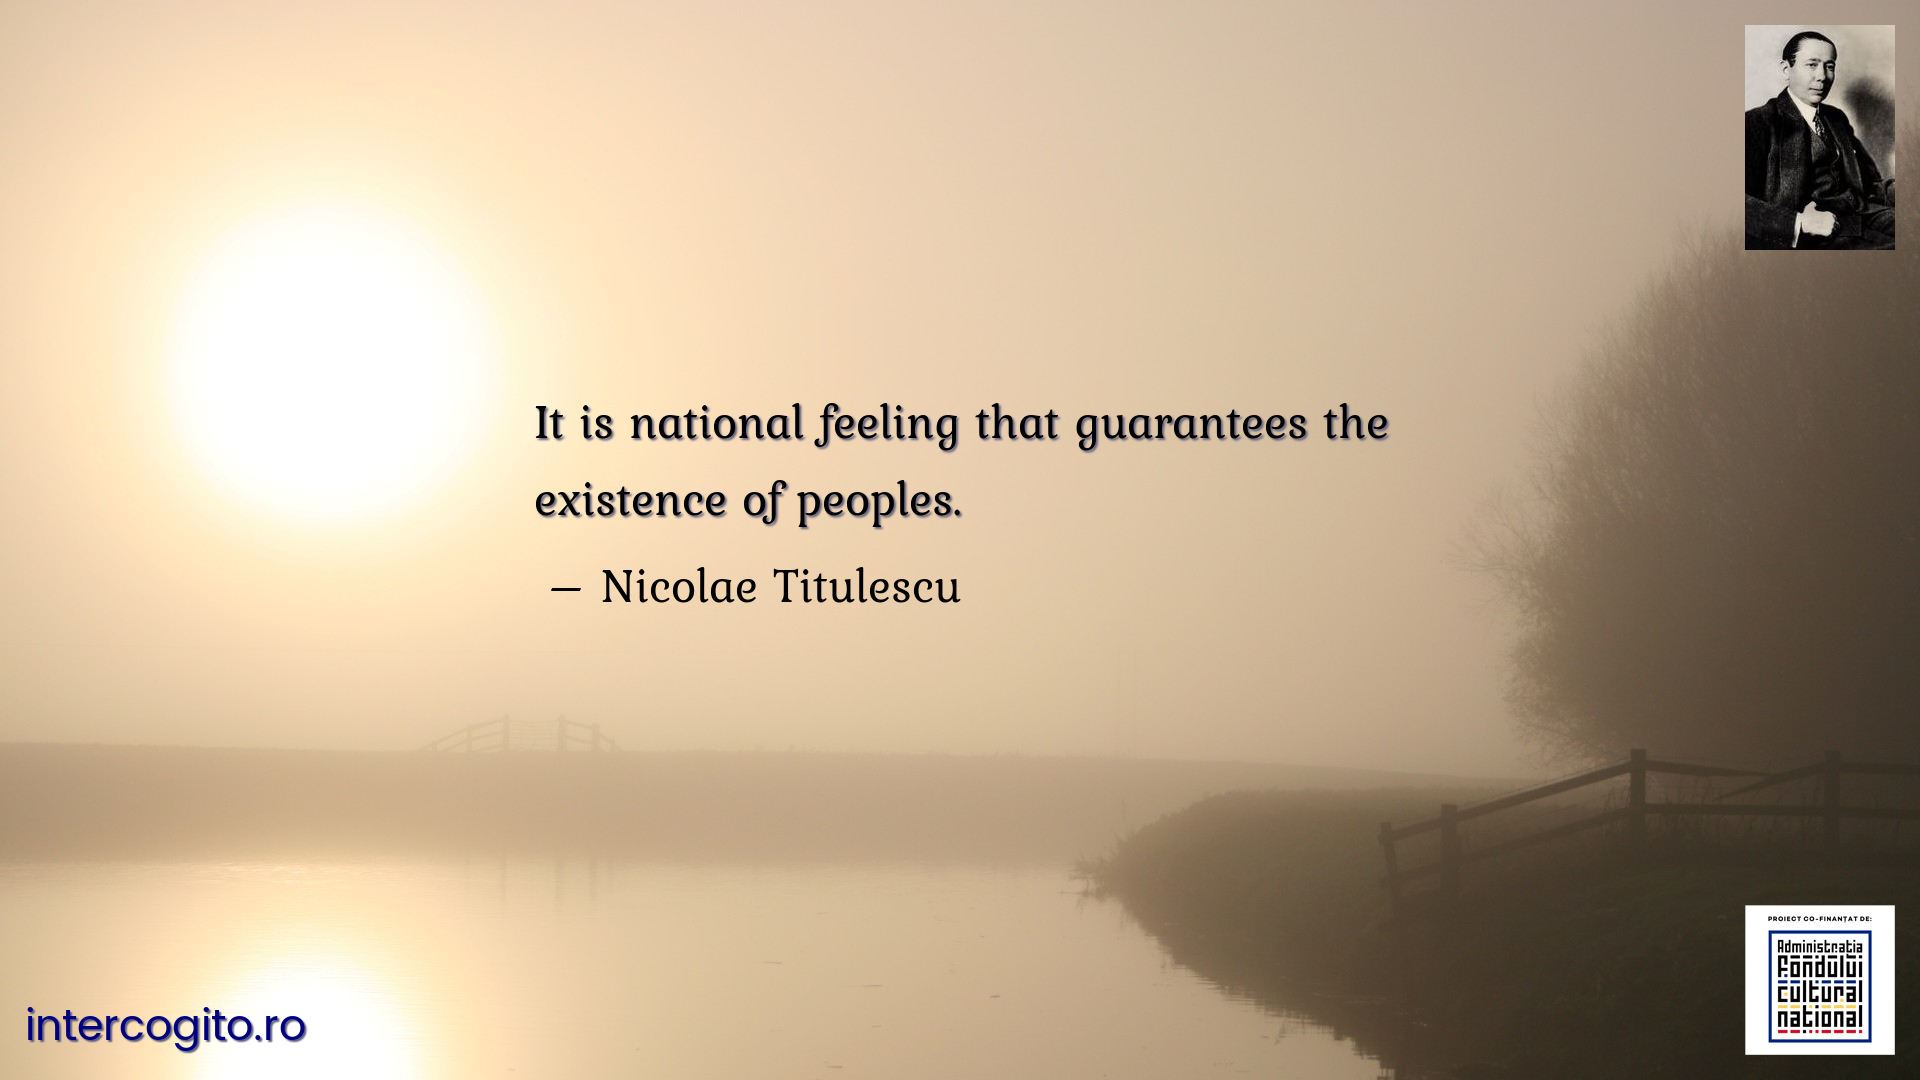 It is national feeling that guarantees the existence of peoples.